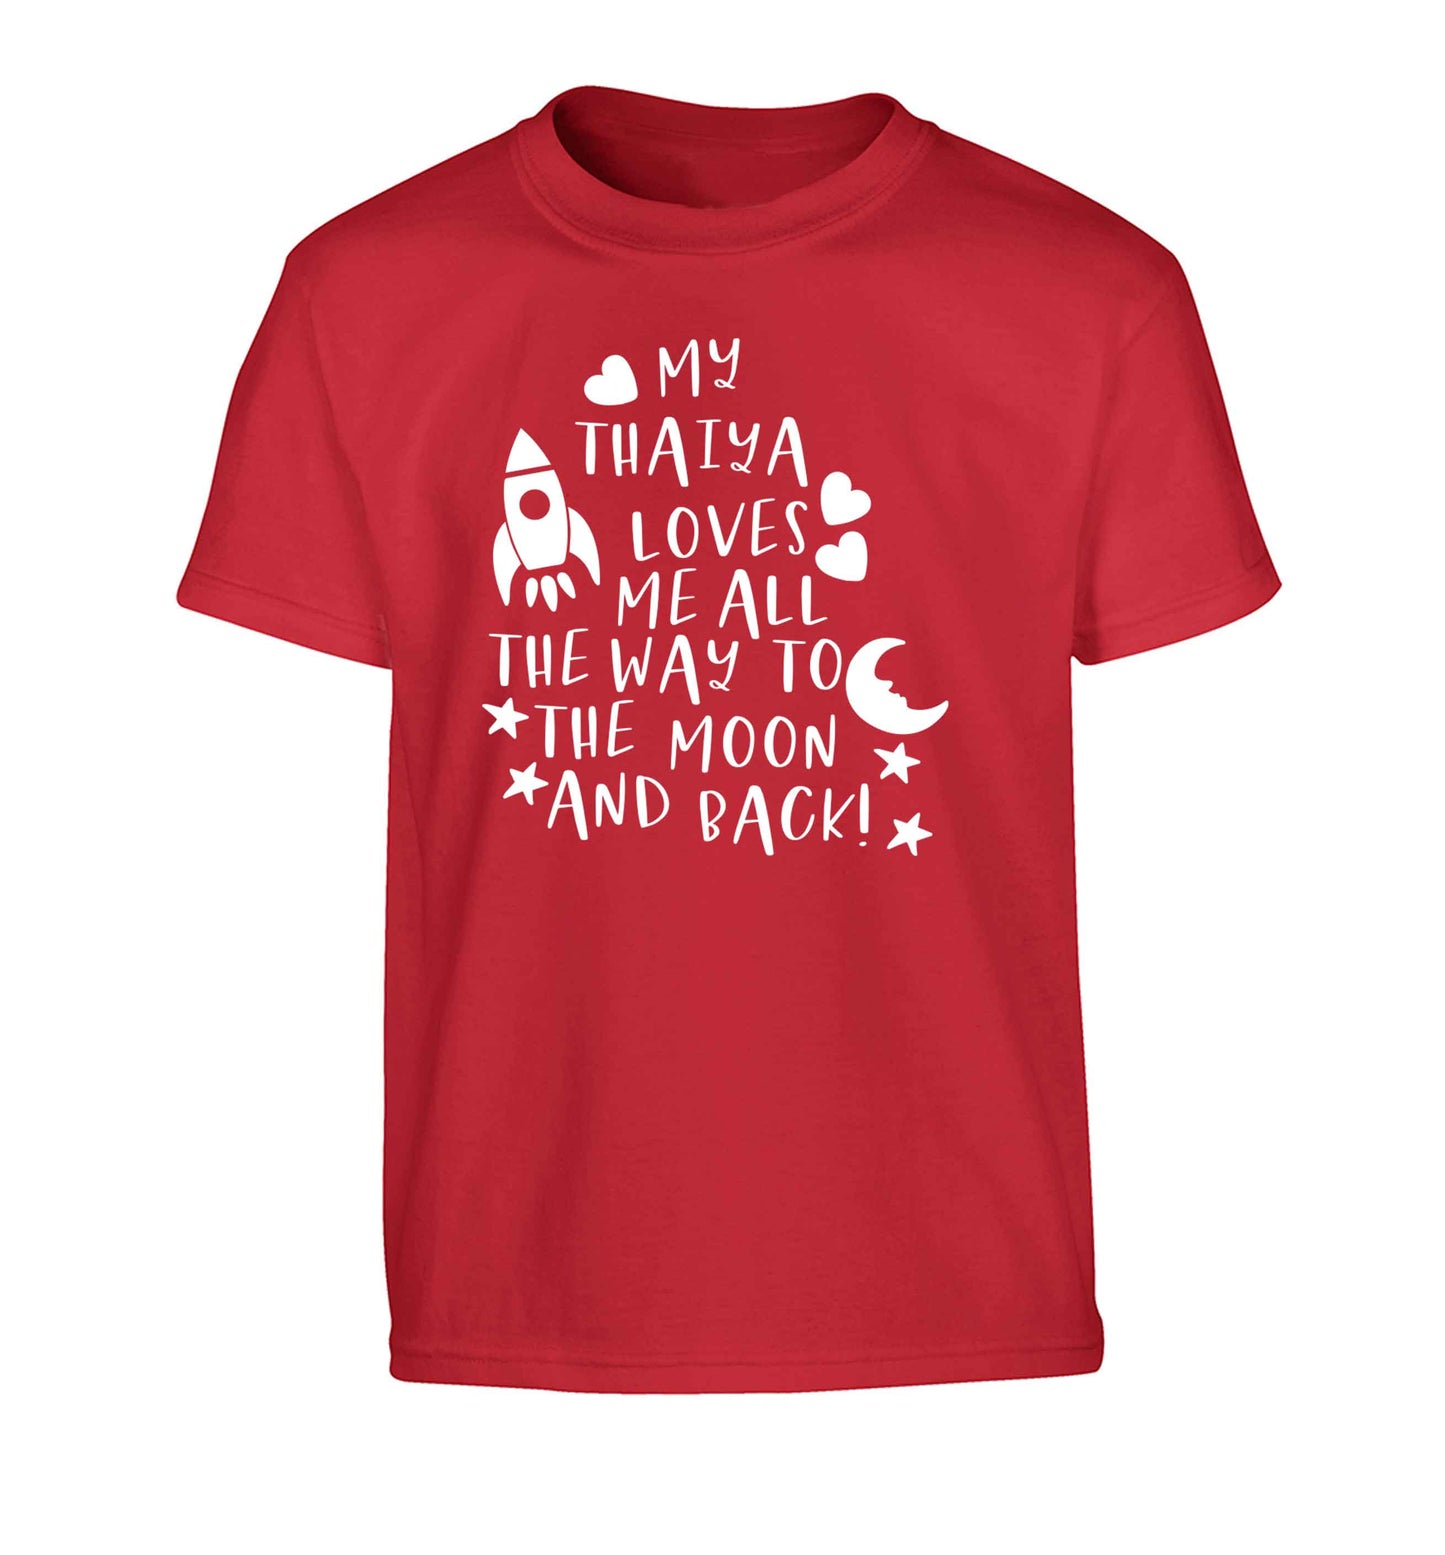 My thaiya loves me all the way to the moon and back Children's red Tshirt 12-13 Years